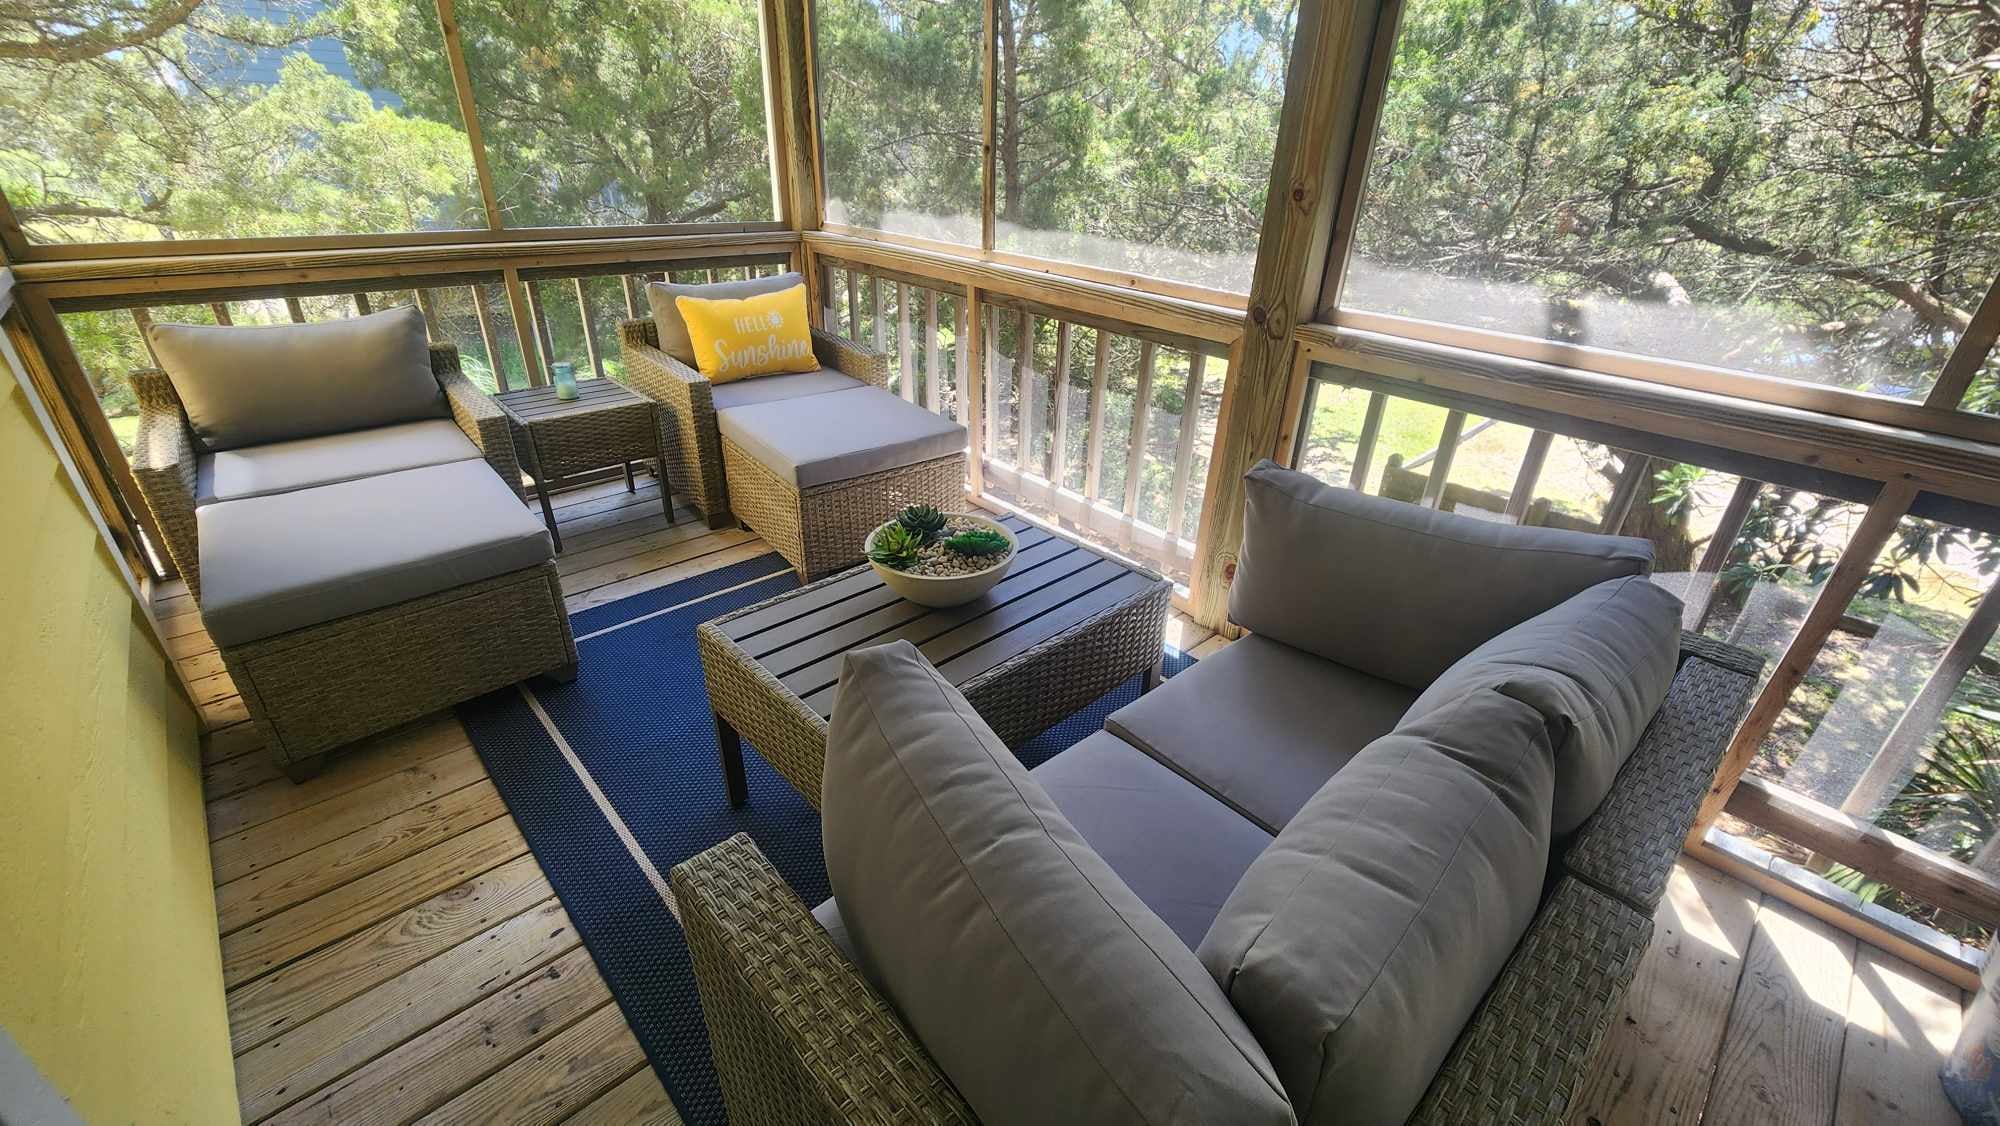 Sitting Area on Screened Porch